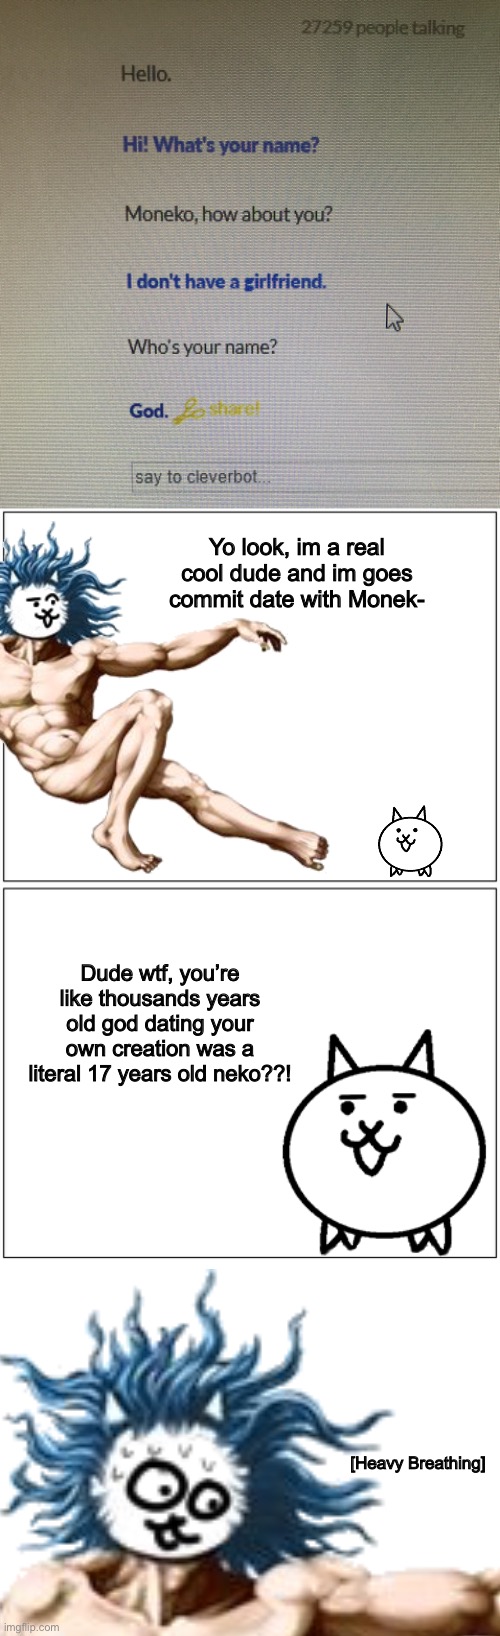 Cat God and the dating site (lol its Cleverbot) | Yo look, im a real cool dude and im goes commit date with Monek-; Dude wtf, you’re like thousands years old god dating your own creation was a literal 17 years old neko??! [Heavy Breathing] | image tagged in memes,funny,cats,god,date,cleverbot | made w/ Imgflip meme maker